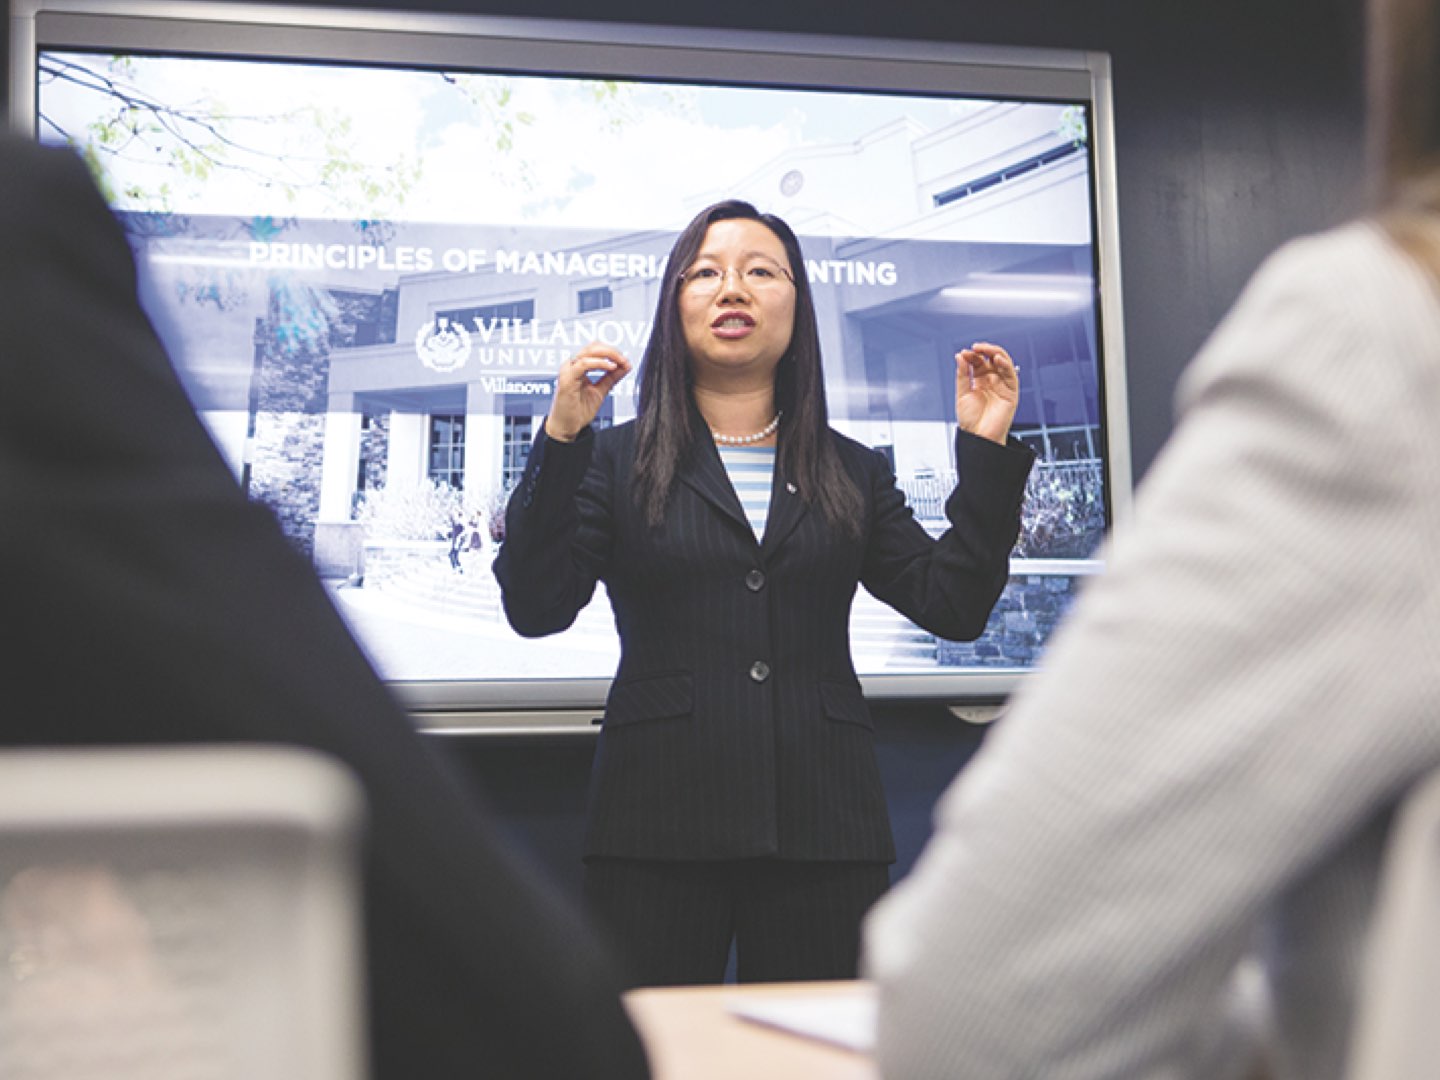 A female Villanova School of Business professor in a suit speaking to a classroom of students.